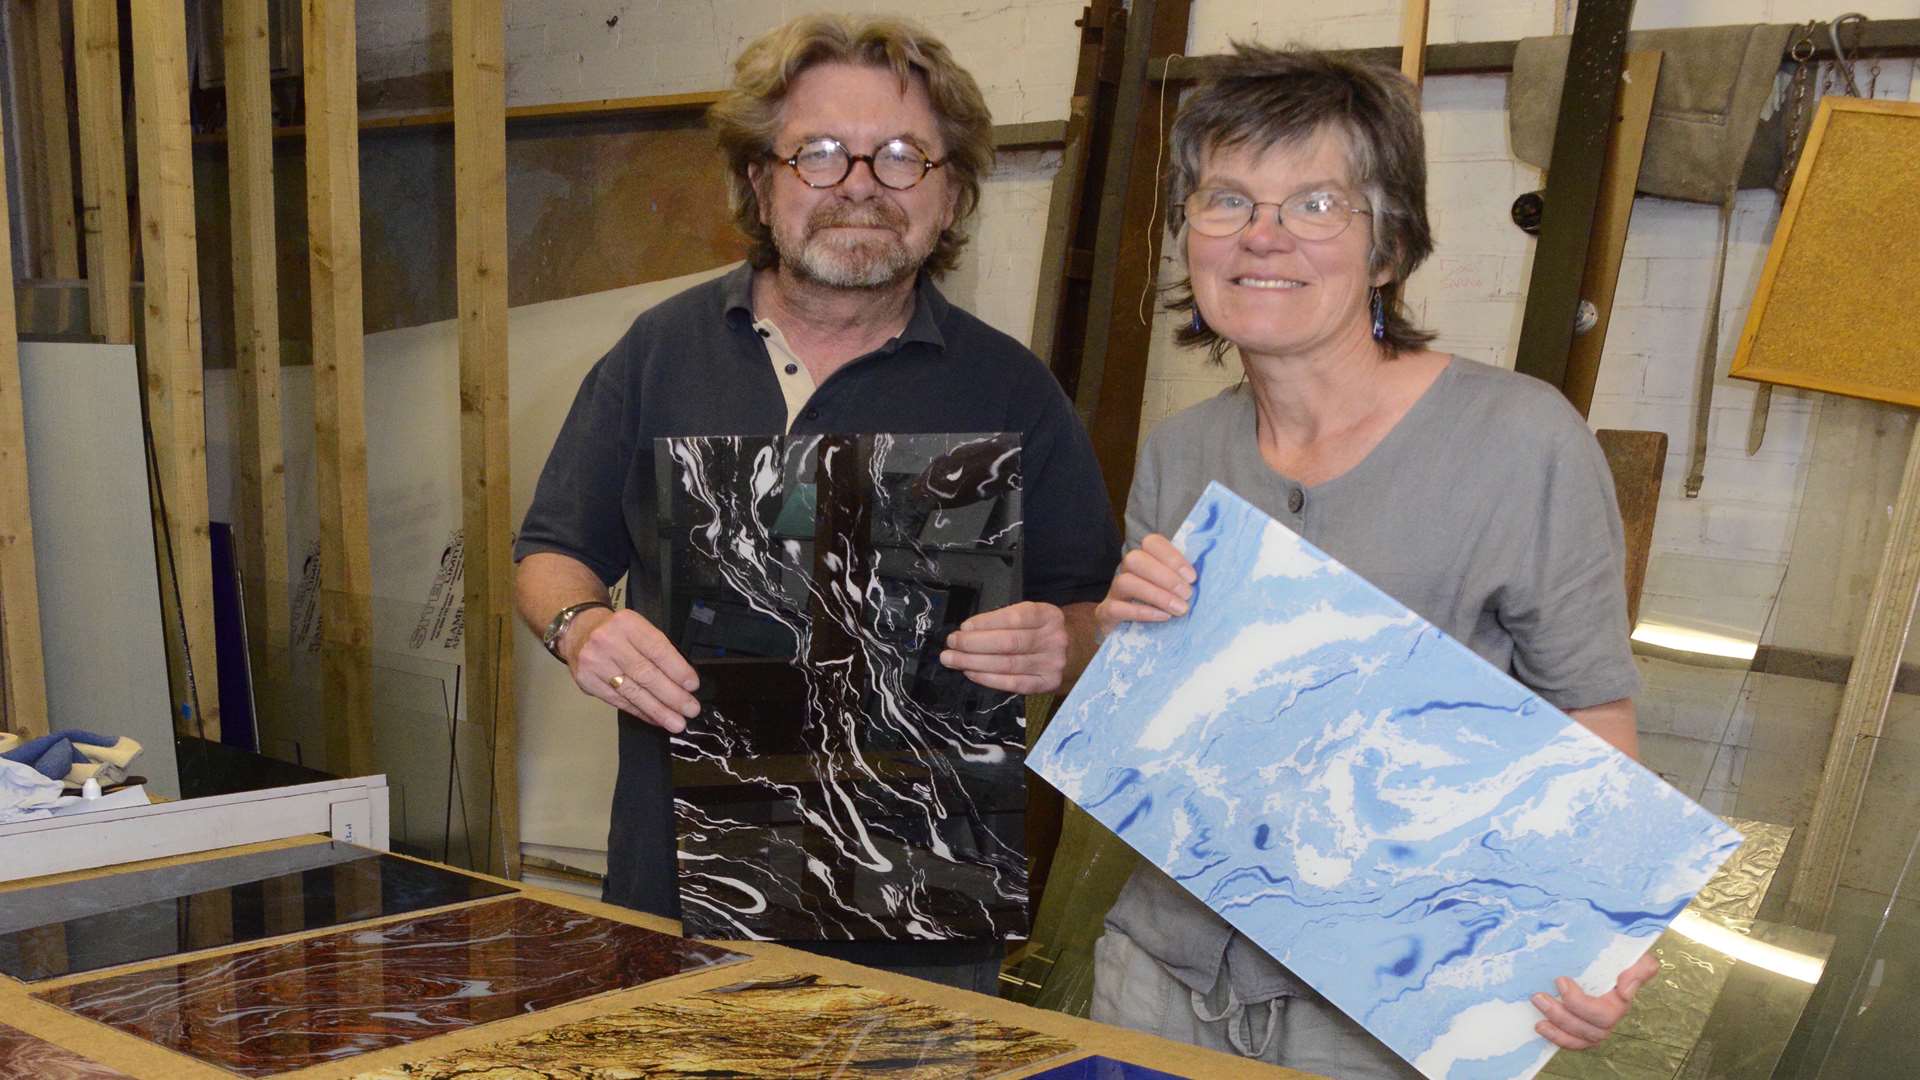 Mike Phipps and Sarah Holliday at the Atoll Marbled Glass workshop